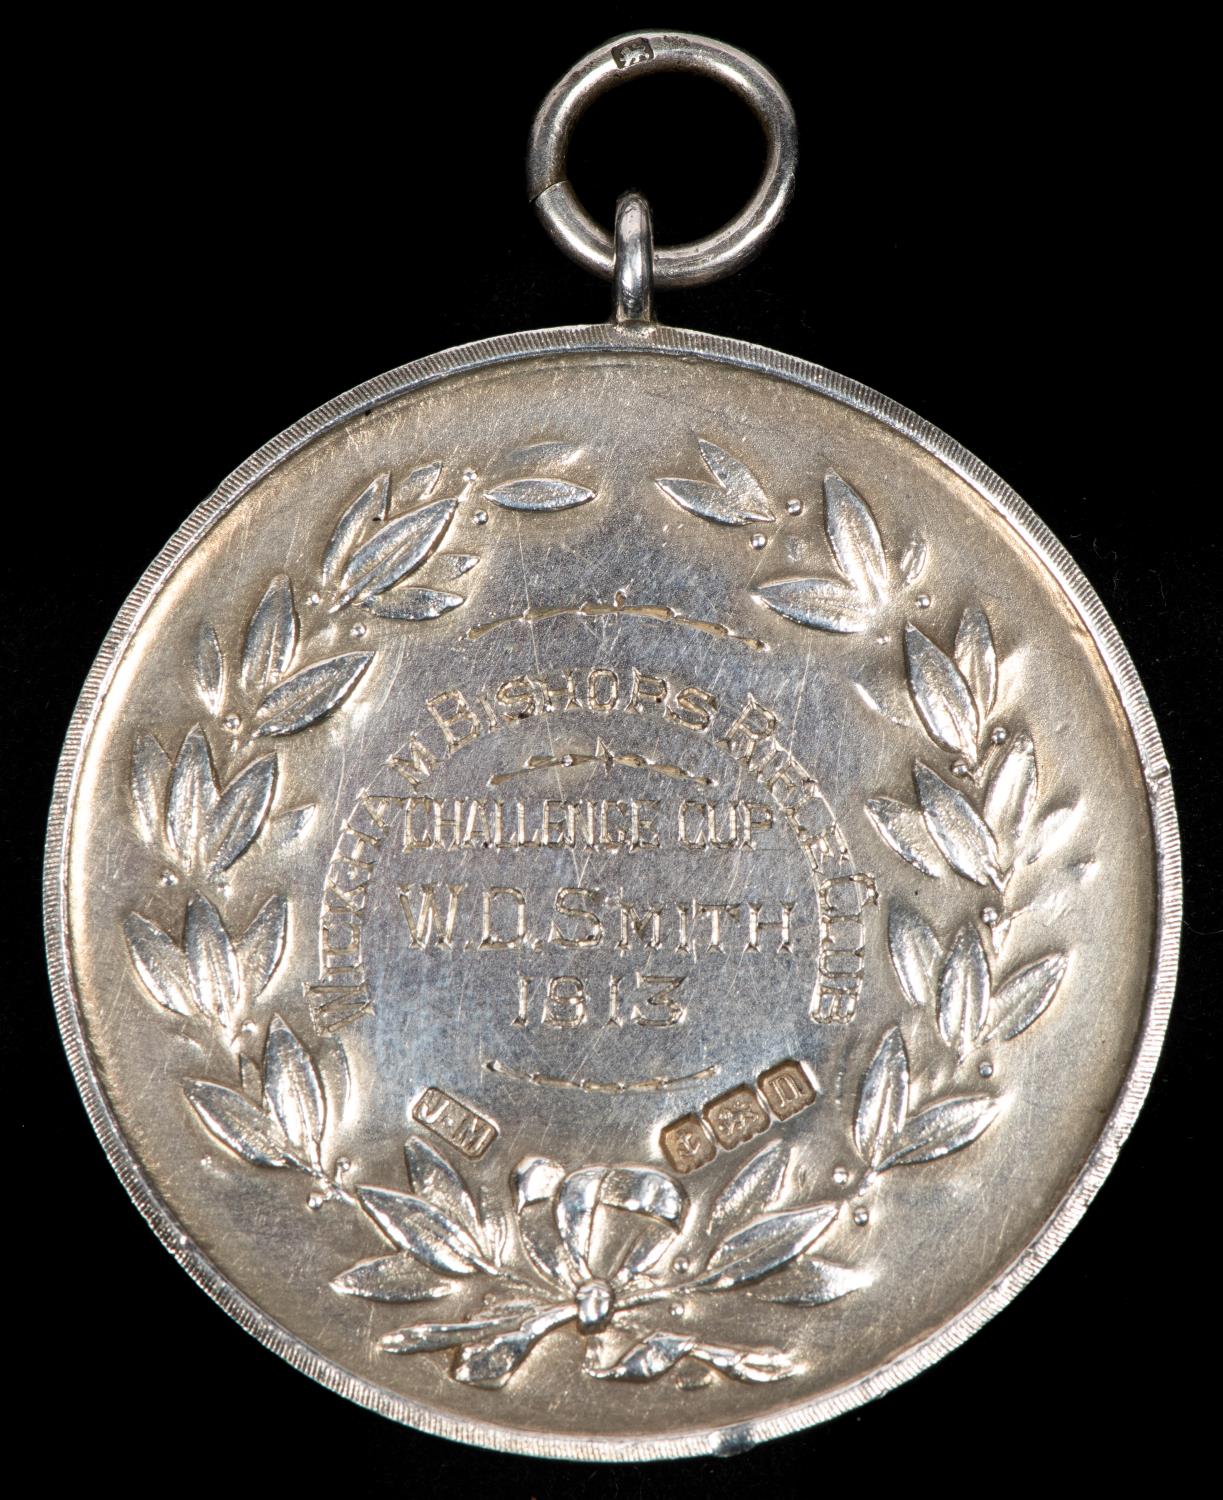 "Wickham Bishops Rifle Club" silver shooting medal, obverse 2 military personnel prone firing at a - Image 2 of 2